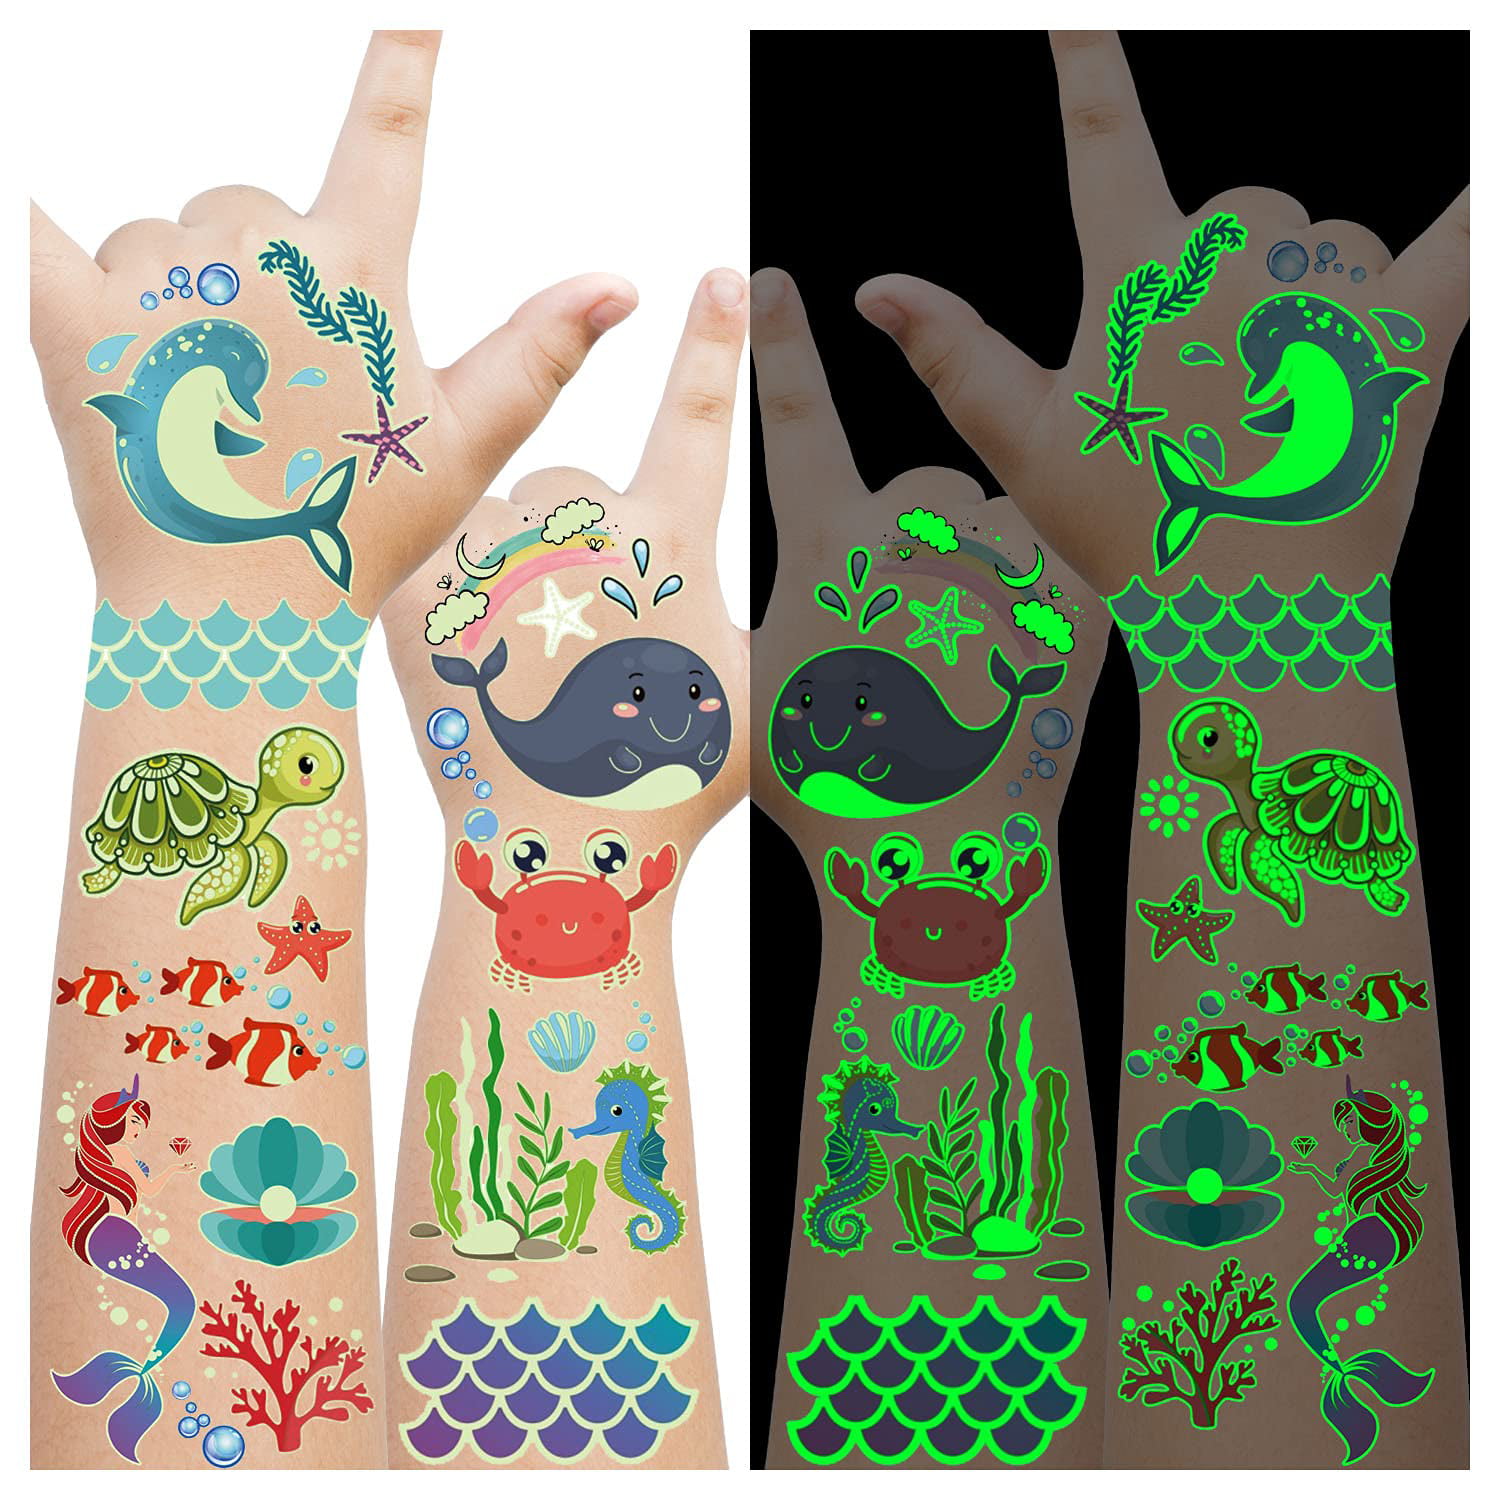 Luminous Underwater Sea Birthday Party Decorations, 145 Styles Glow  Temporary Tattoos for Kids, Under Sea Ocean Beach Pool Party Supplies  Favors, Sea Animals Tattoo Stickers - 12 Sheets 